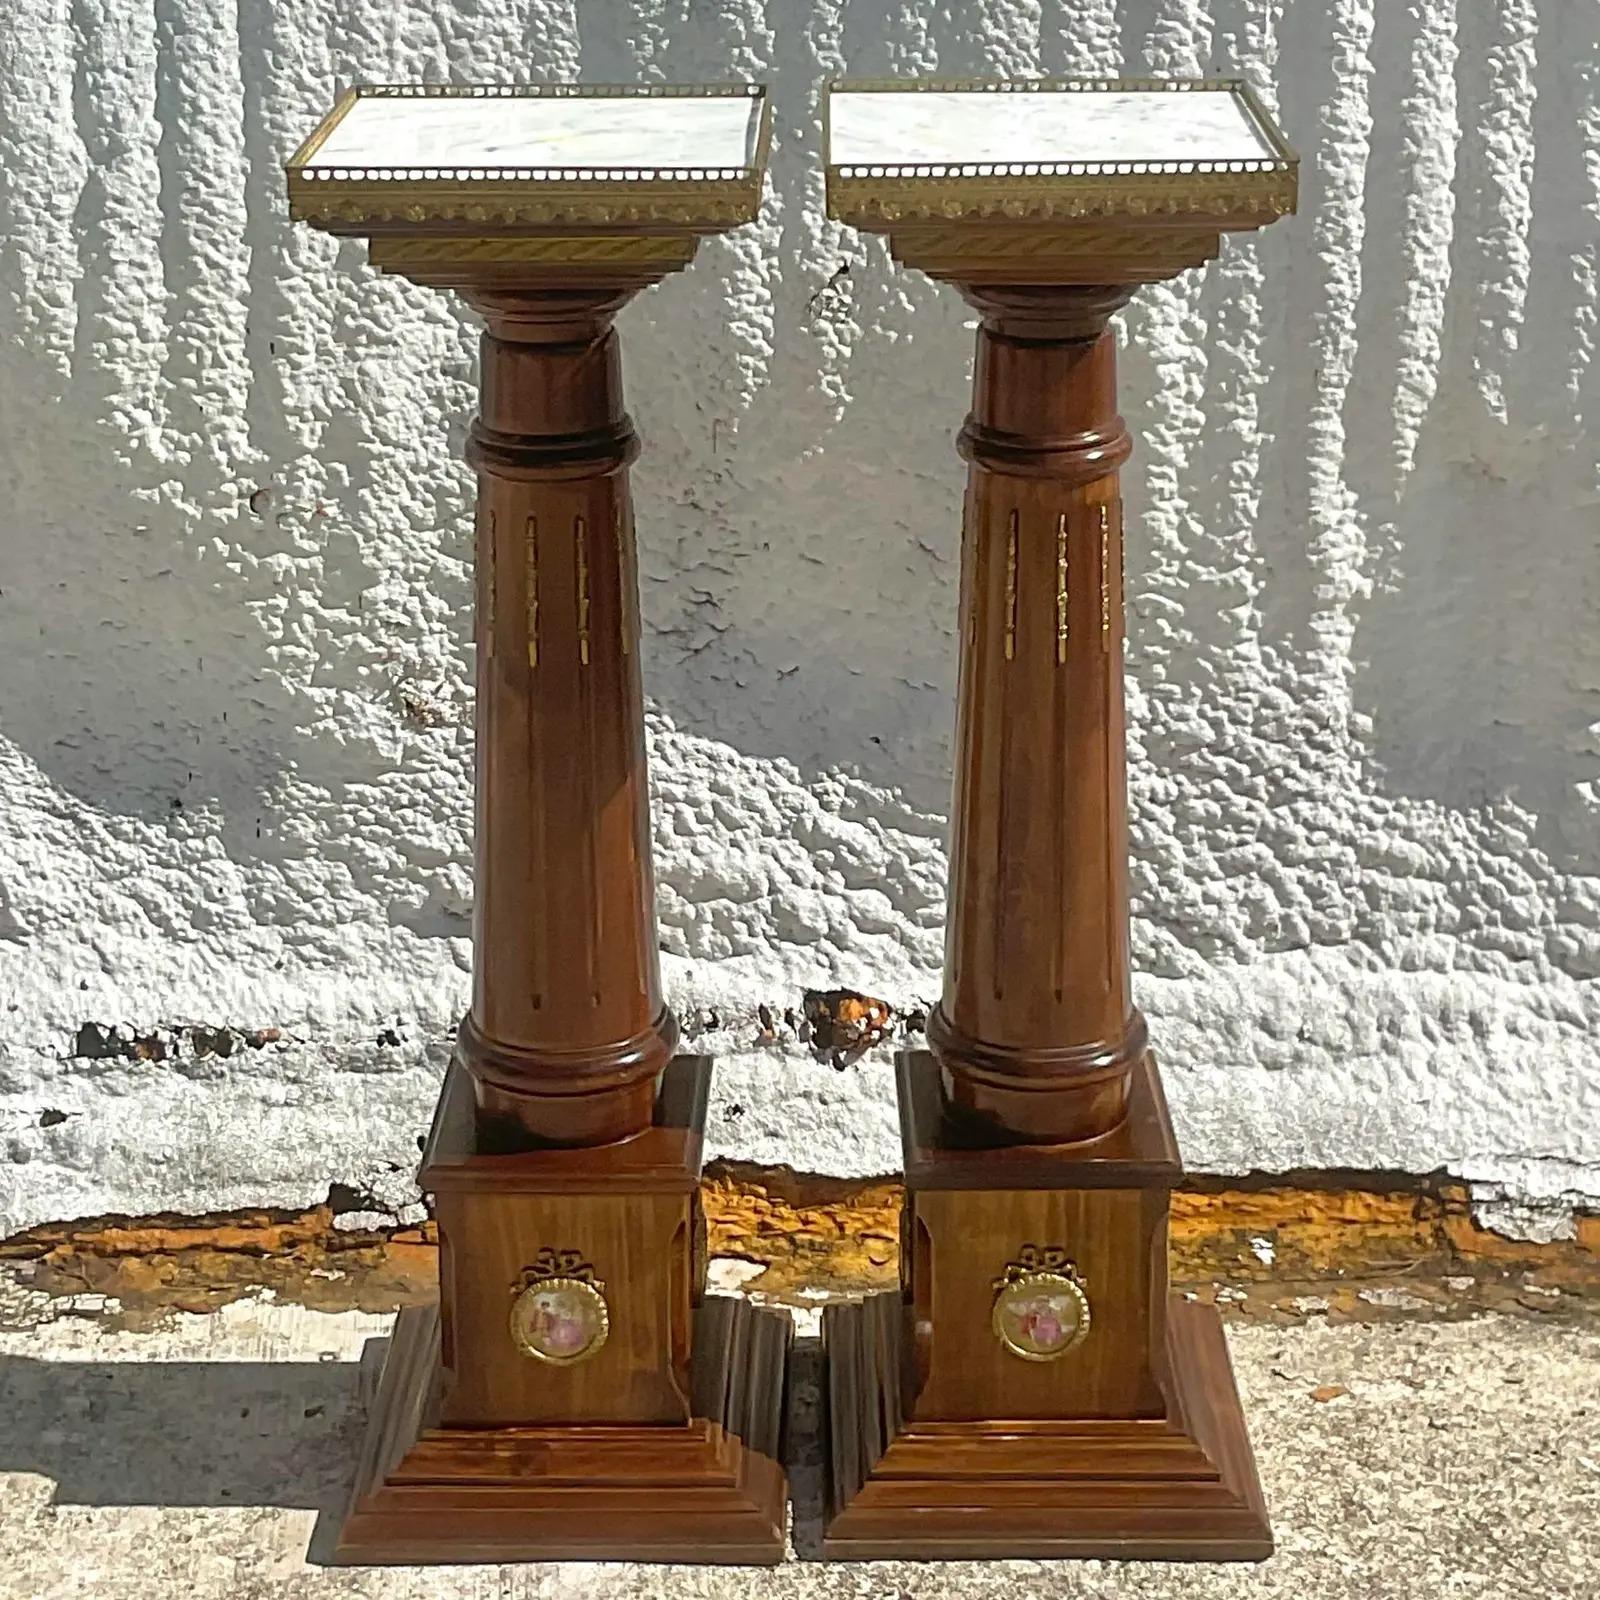 20th Century Vintage Regency Wedgwood Cameo Pedestals - a Pair For Sale